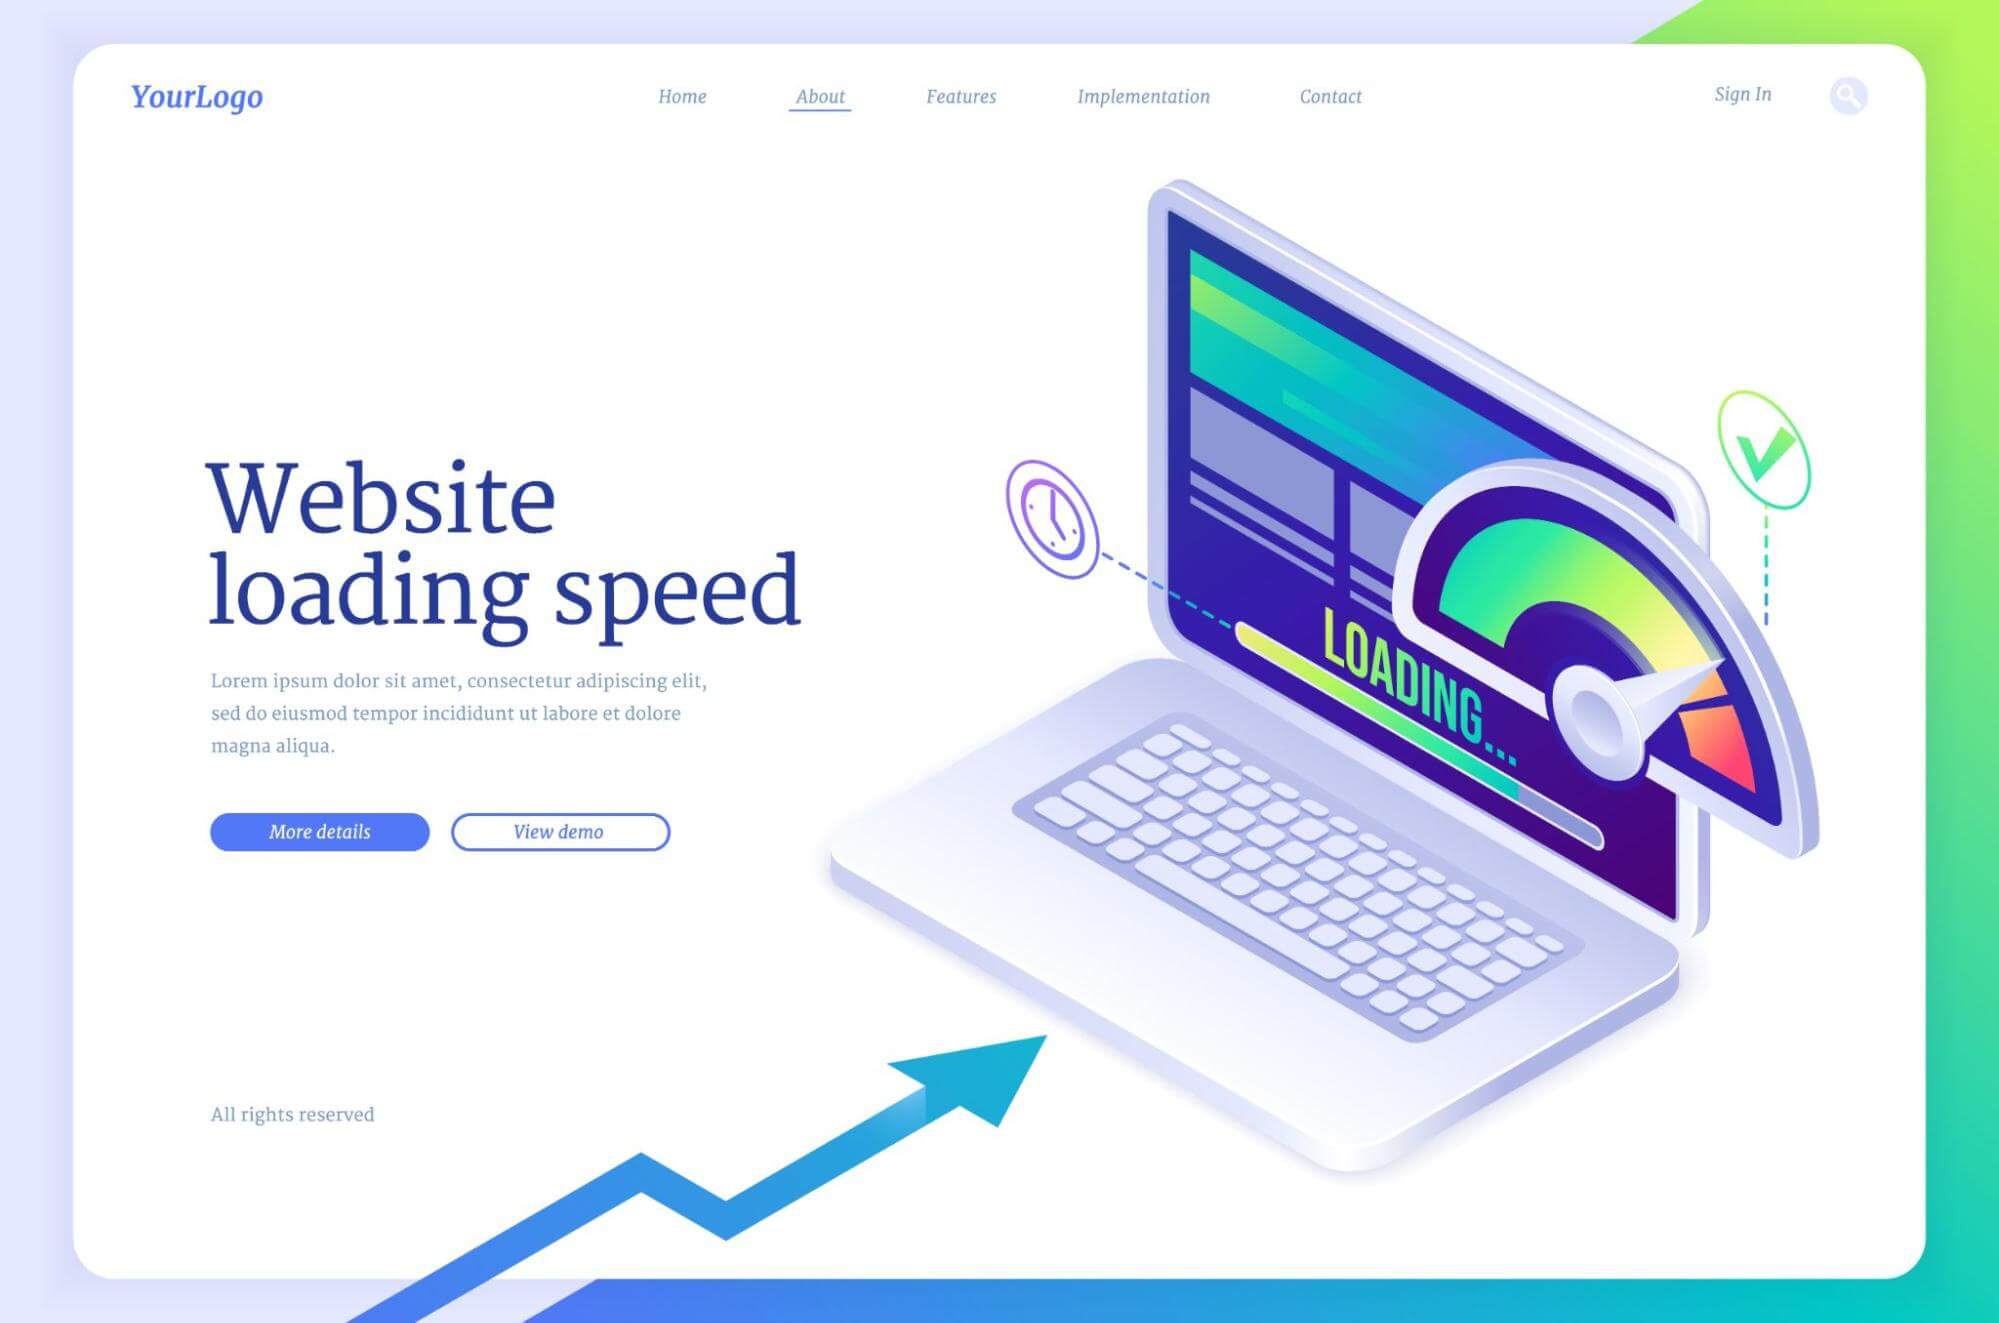 optimize loading speed - Shopify store design tips